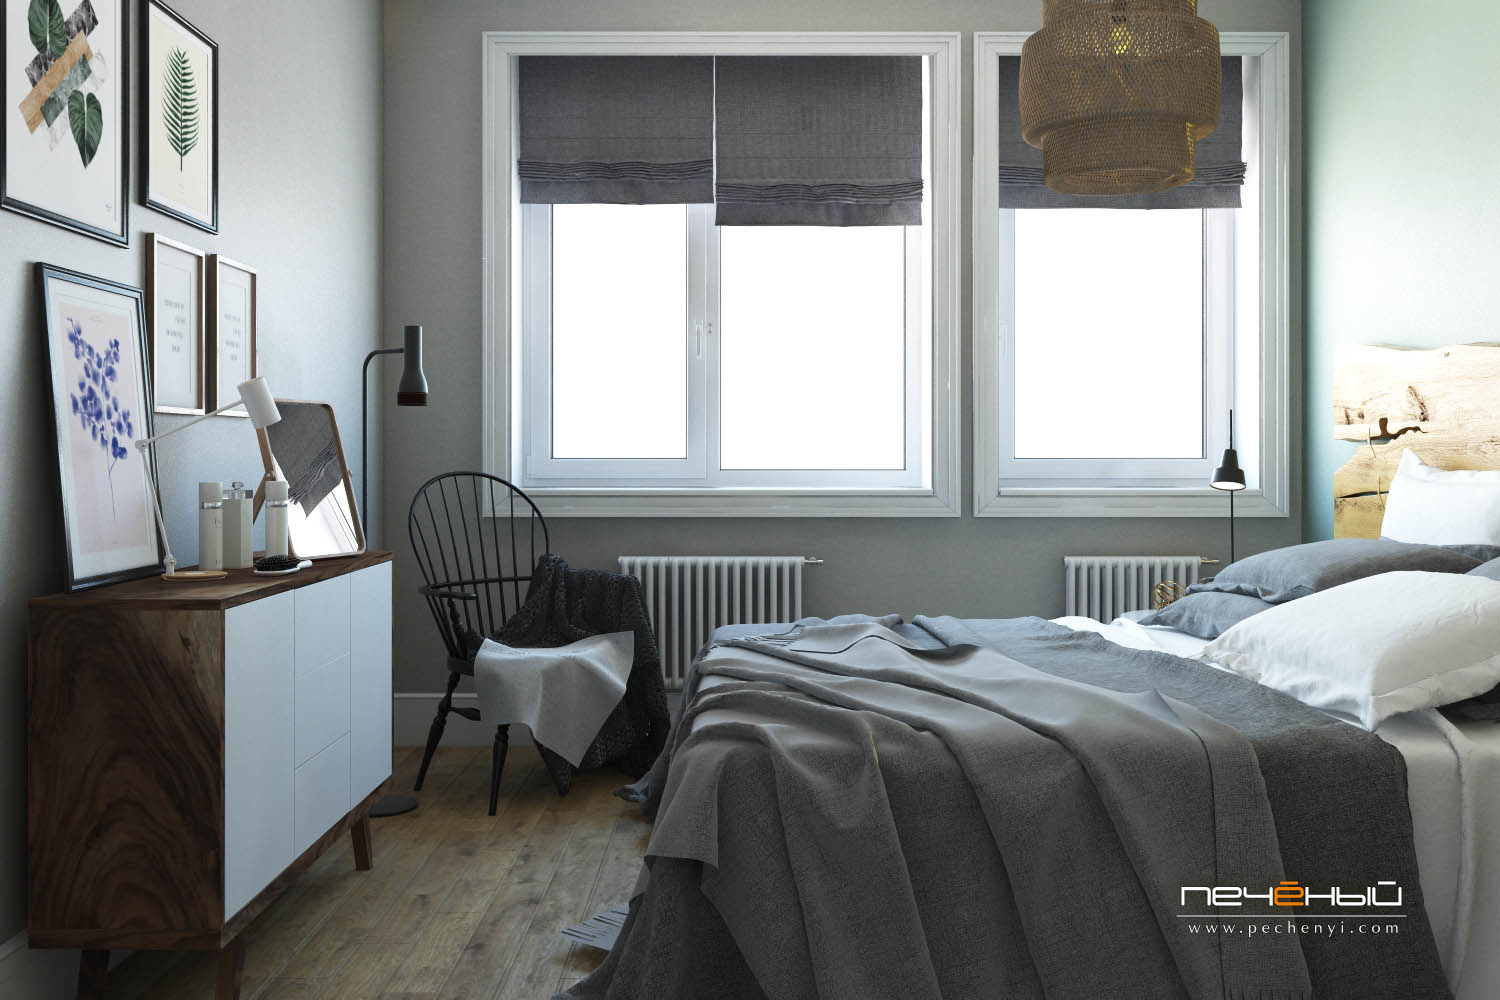 The bedroom is done in light grey and with warm woods, botanical artworks enliven it and raw wood makes the space cozier